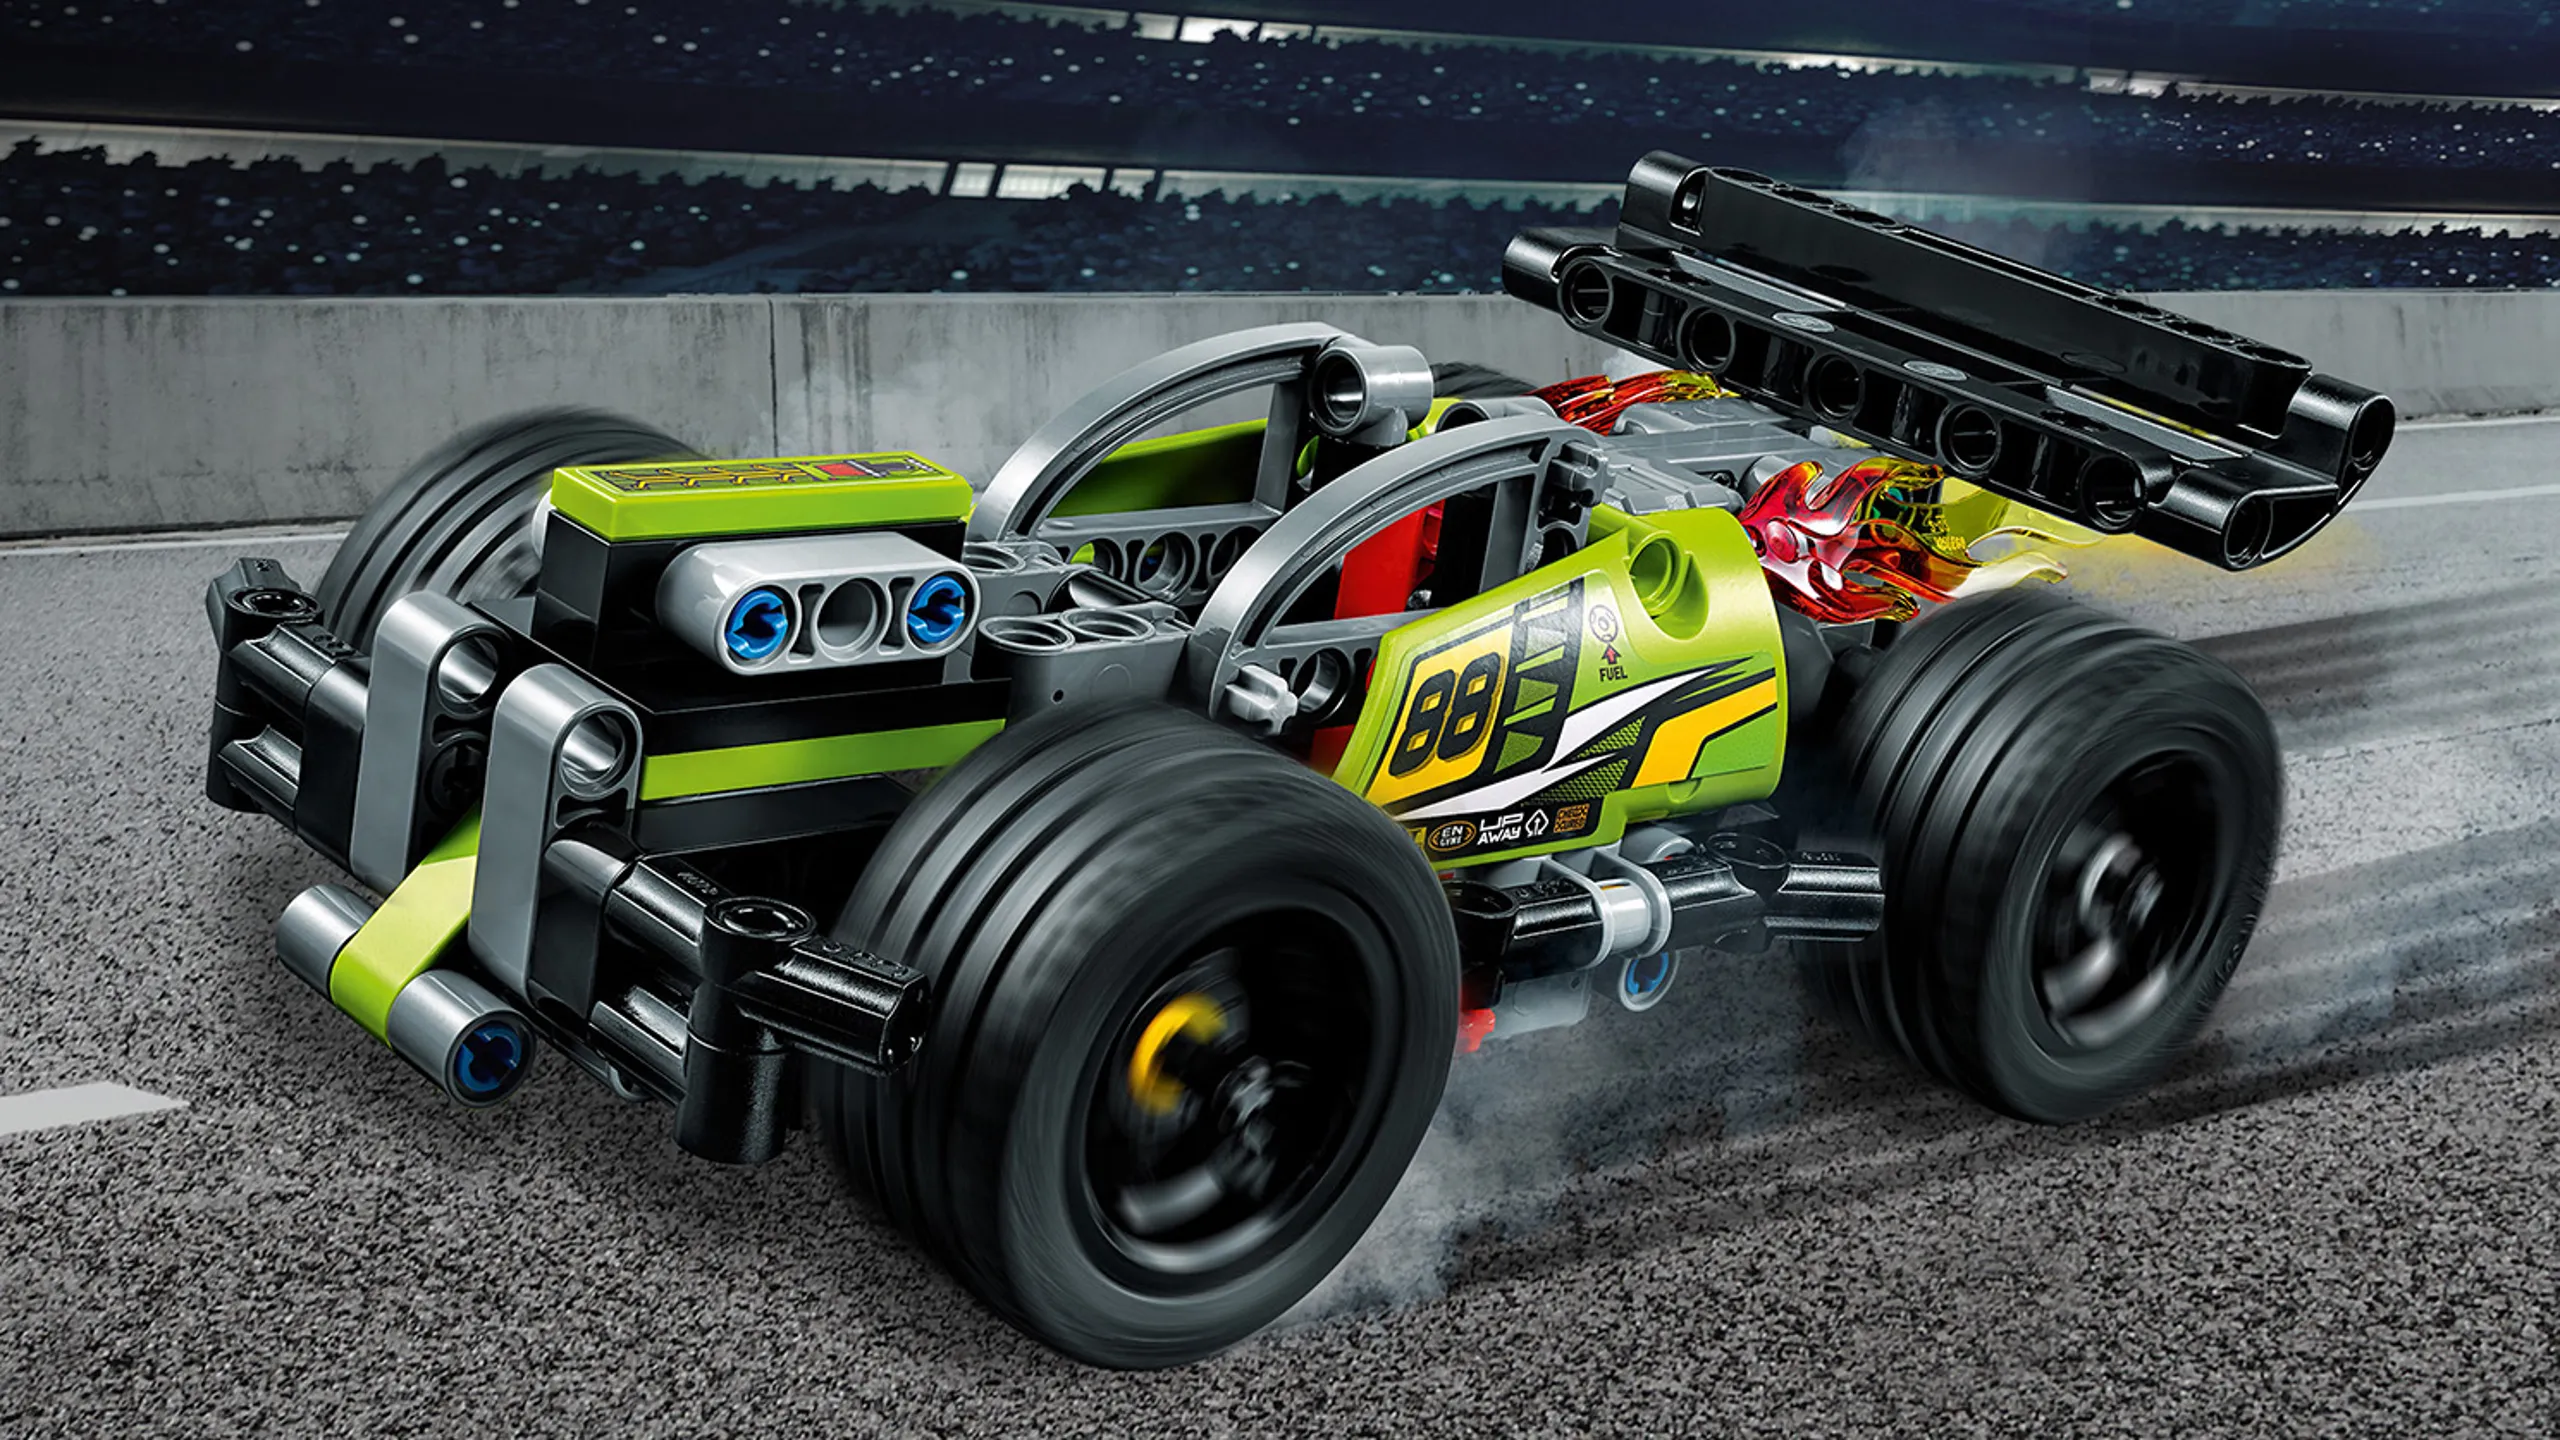 LEGO Technic - 42072 WHACK! - Power up this super-fast vehicle in lime-green, red and gray colors with pull-back motor featuring a sturdy front bumper, large rear spoiler and wide black rims with low profile tires for ultimate grip. 